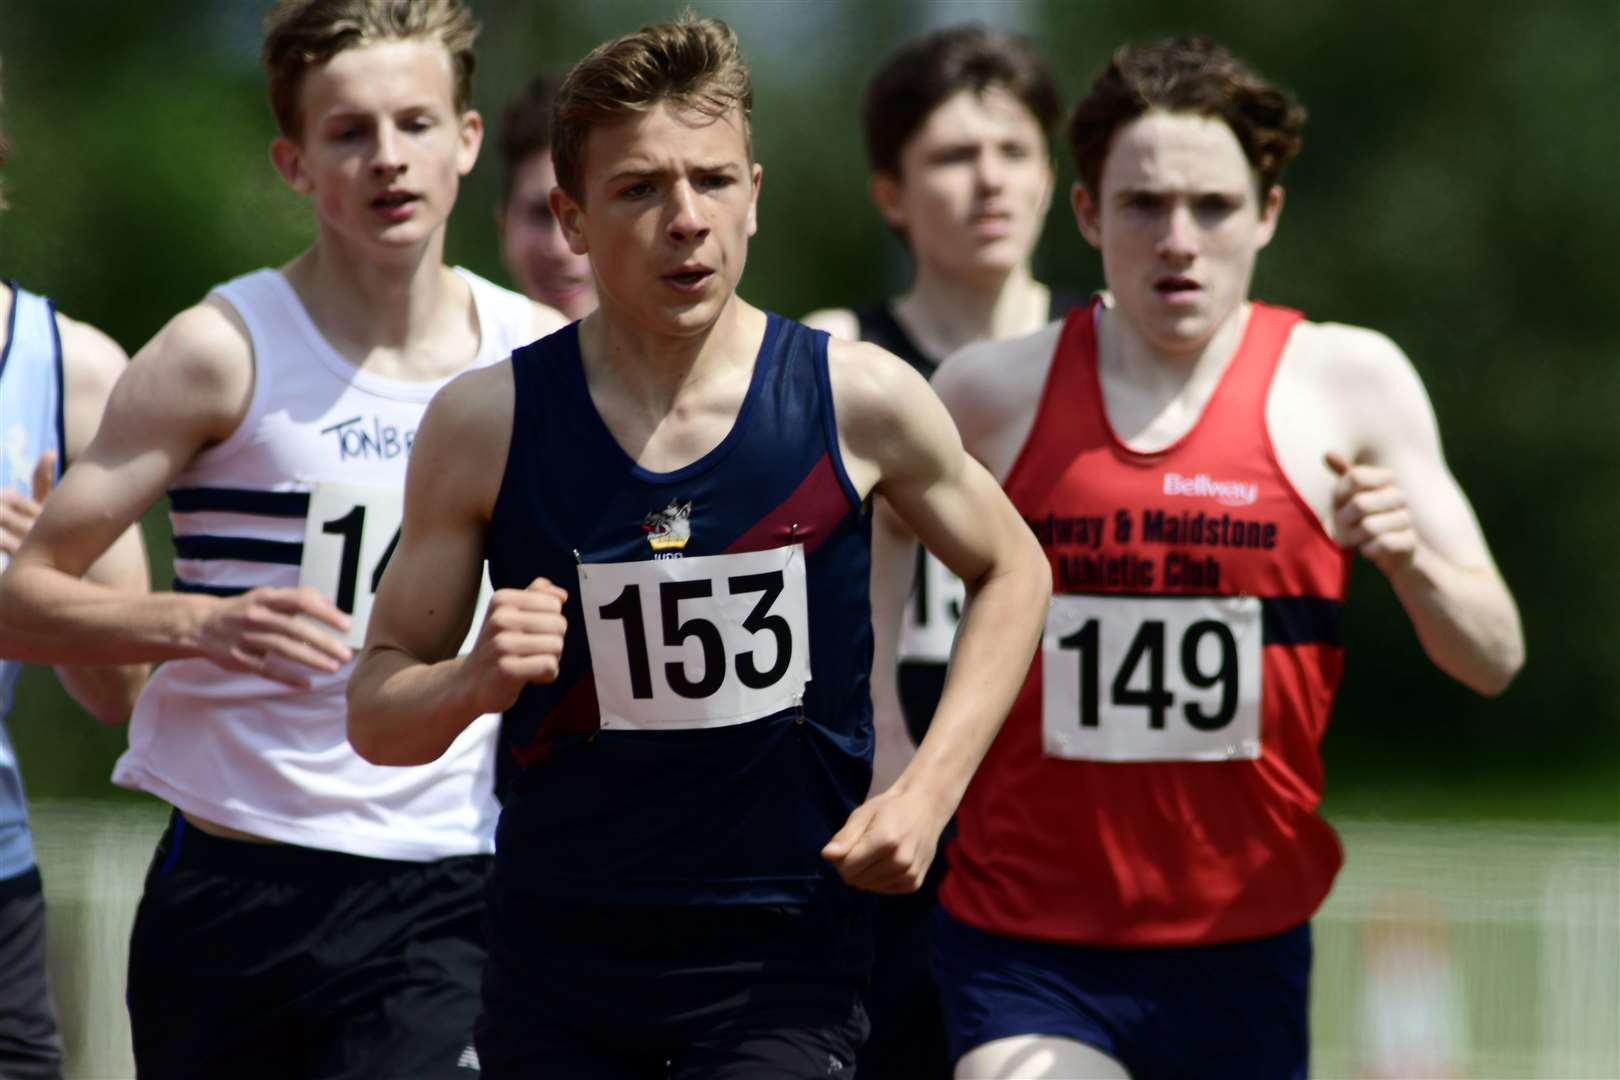 Ethan Rocks (153) in the 800m Picture: Barry Goodwin